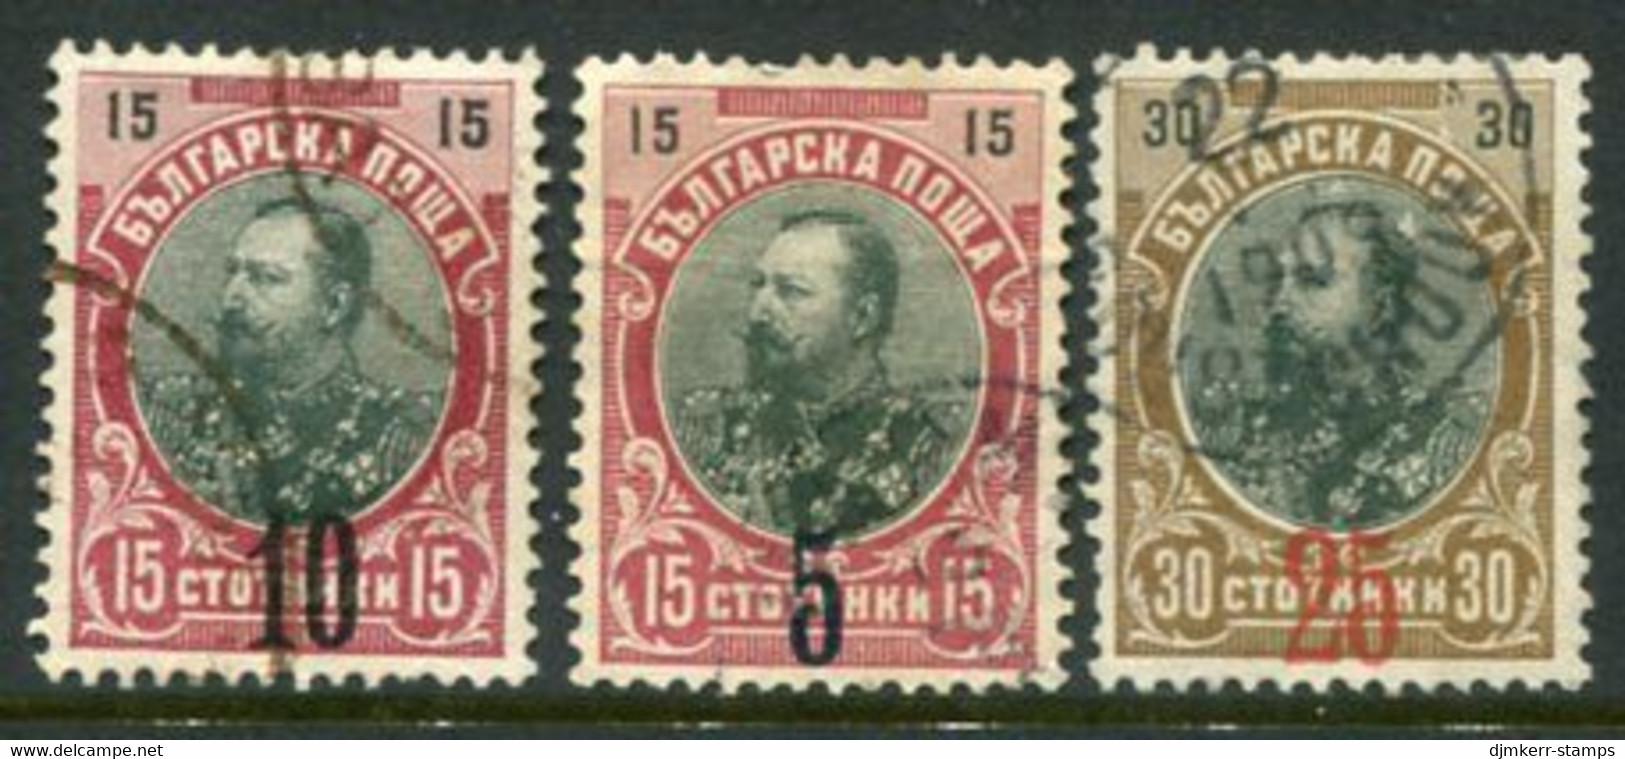 BULGARIA 1903-09  Surcharges 10 On 15 St. 5 On 15 St. And 25 On 30 St. Used.  Michel 65, 69-70 - Gebruikt